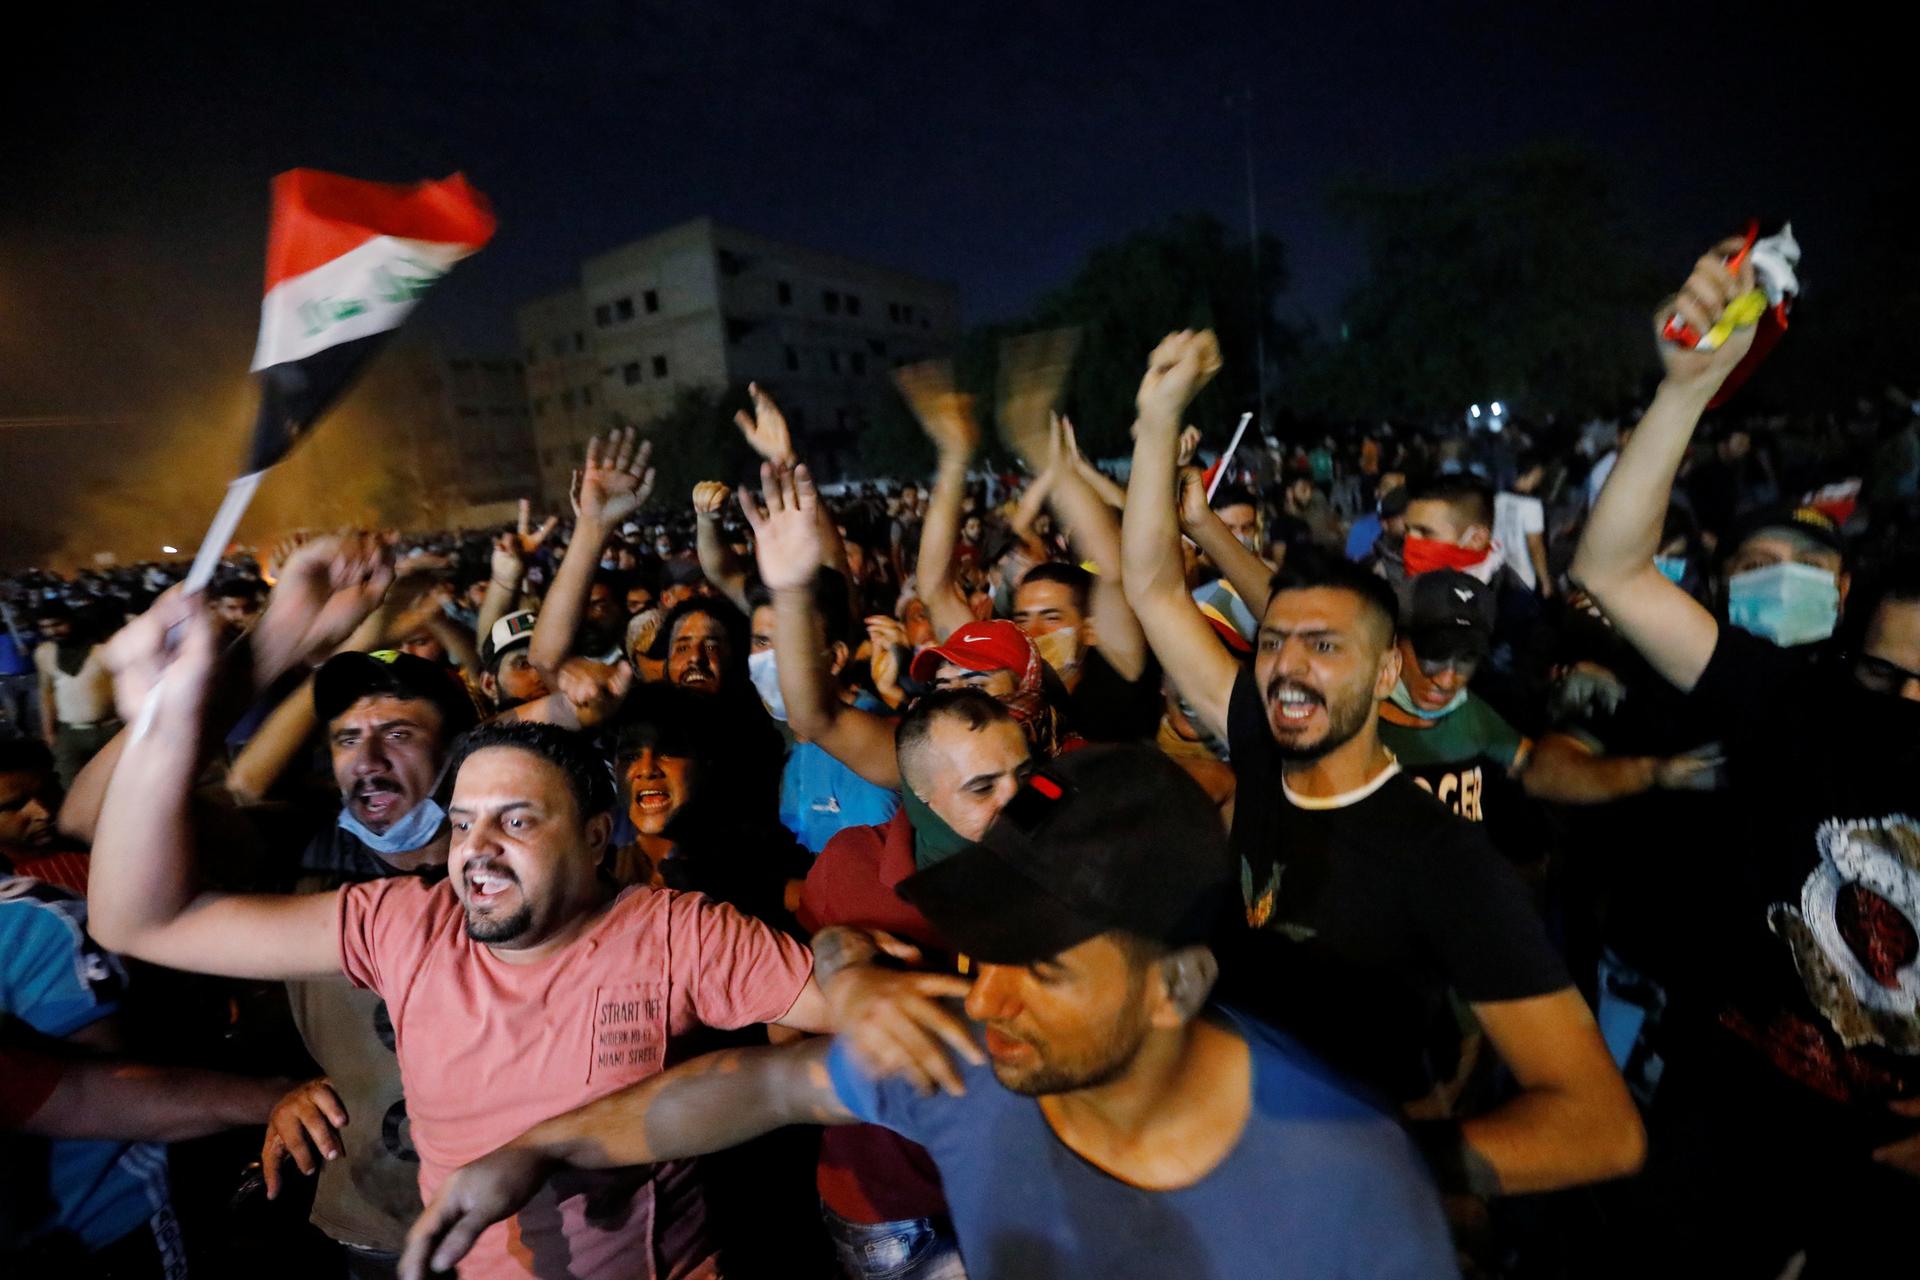 Demonstrators gathered at a protest during a curfew, two days after the nationwide anti-government protests turned violent, in Baghdad, Iraq, on Oct. 3, 2019.